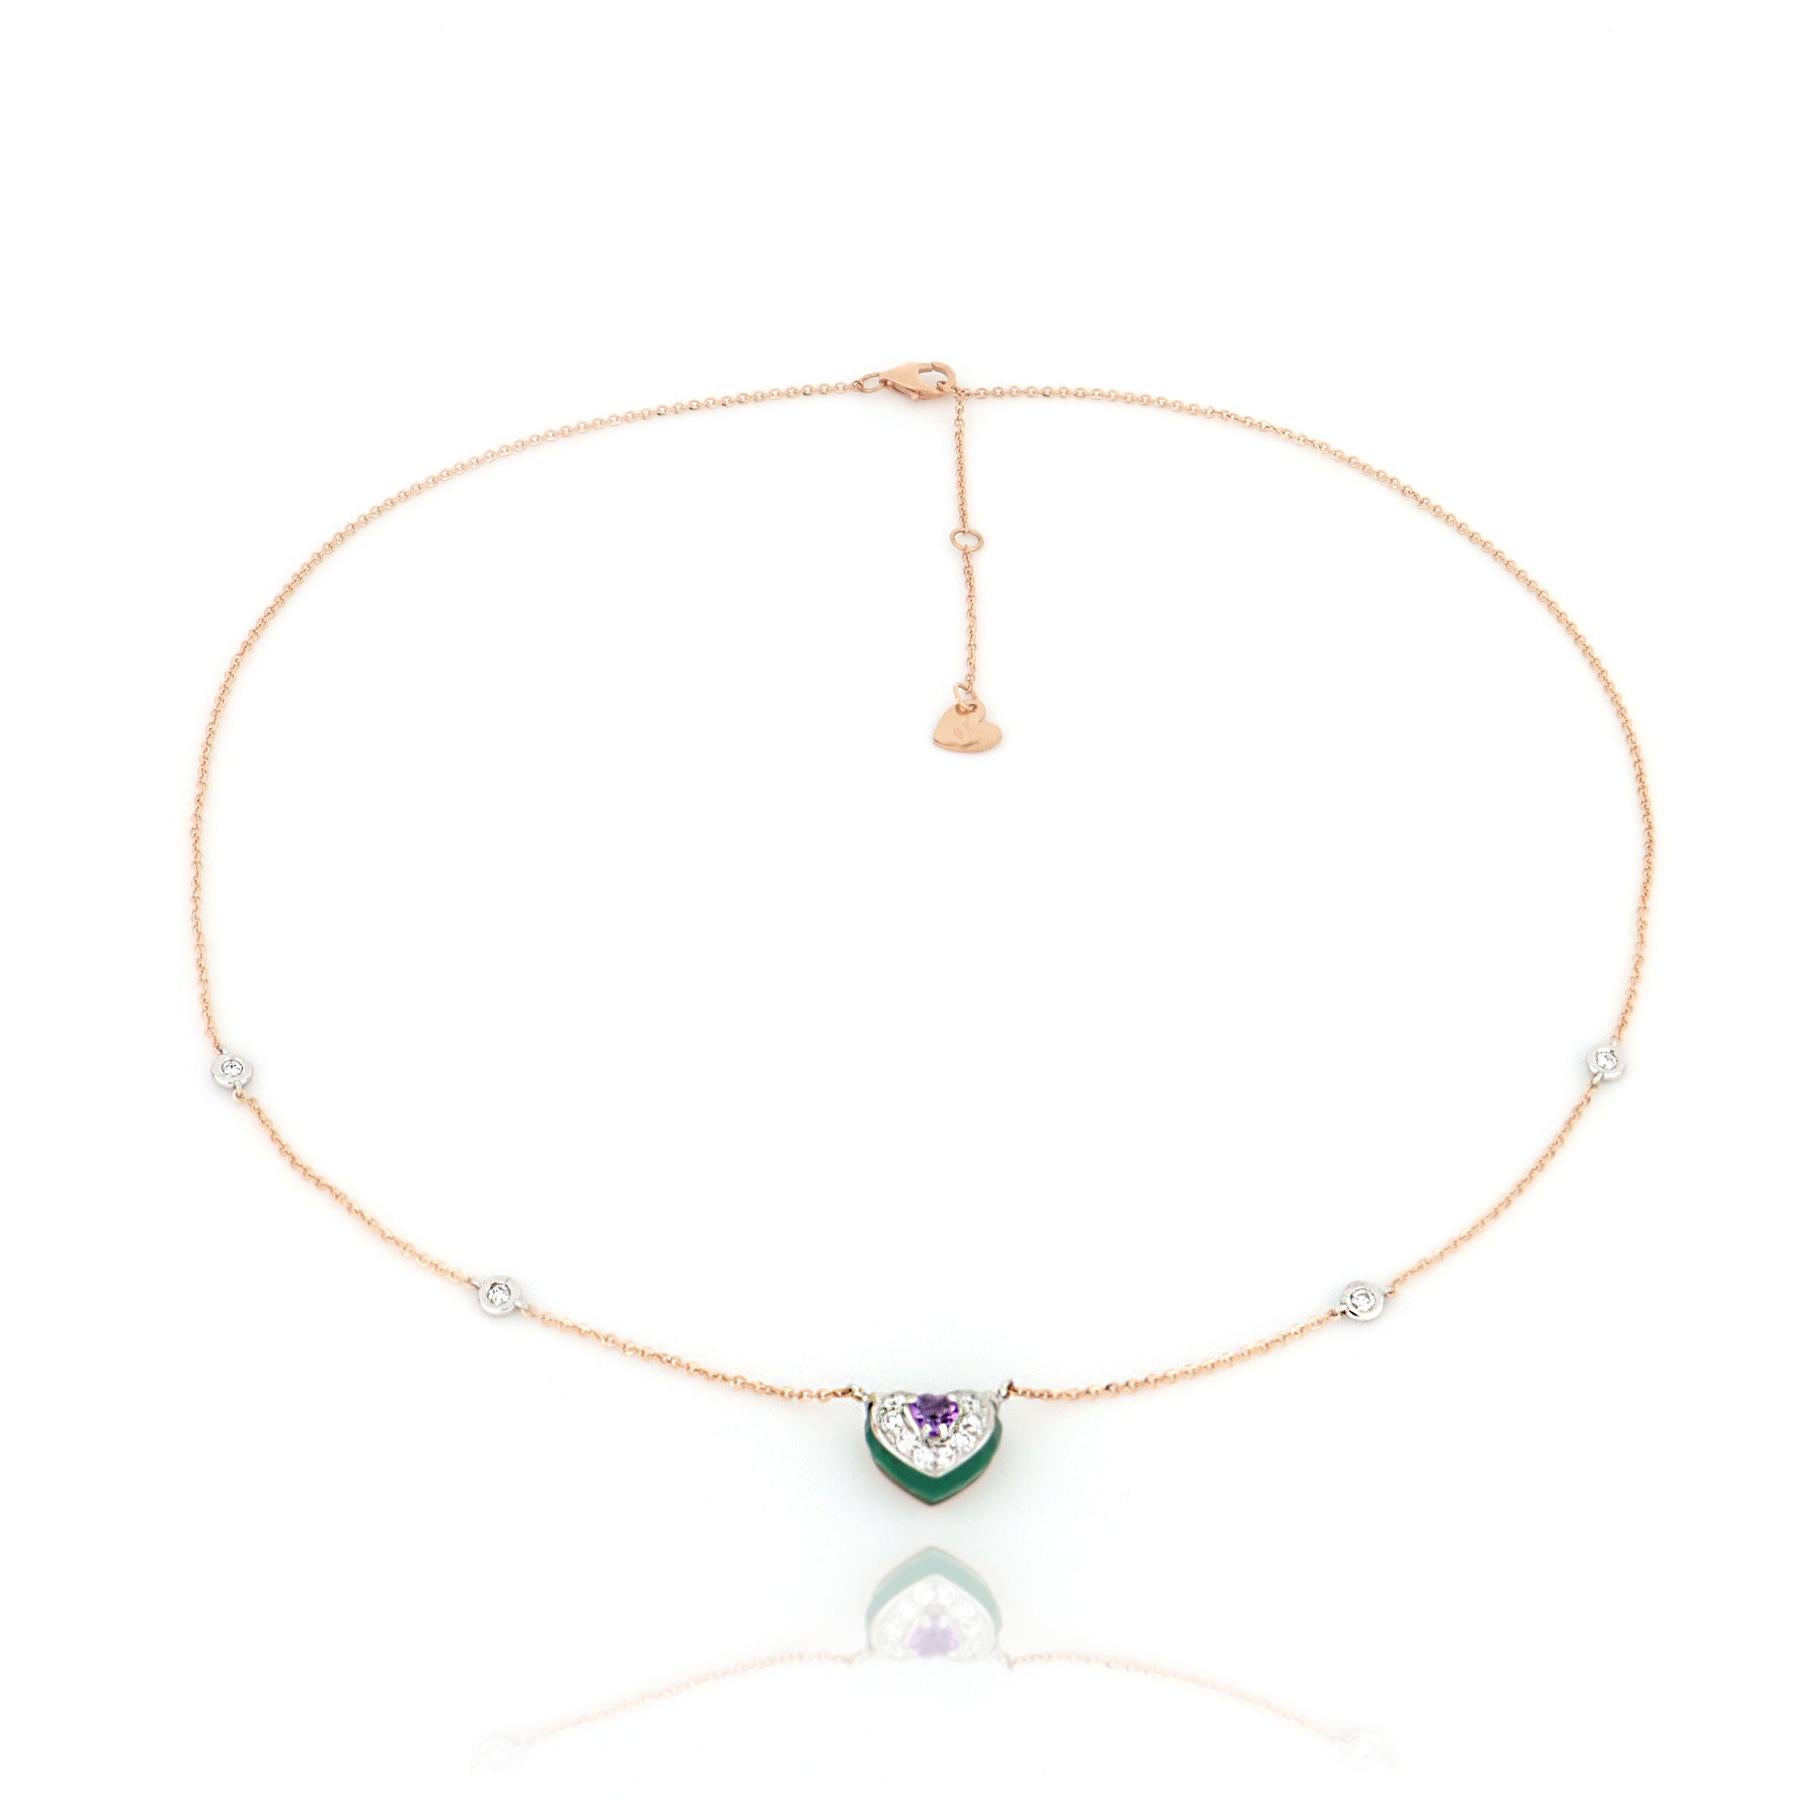 A fresh and playful geometry for the center of this rose gold necklace. Purple amethyst and green onyx in a combination of contrasts embellished by shiny diamonds.

Necklace lenght 43 cm with extension at 45 cm and 48 cm, rose gold diamond chain,